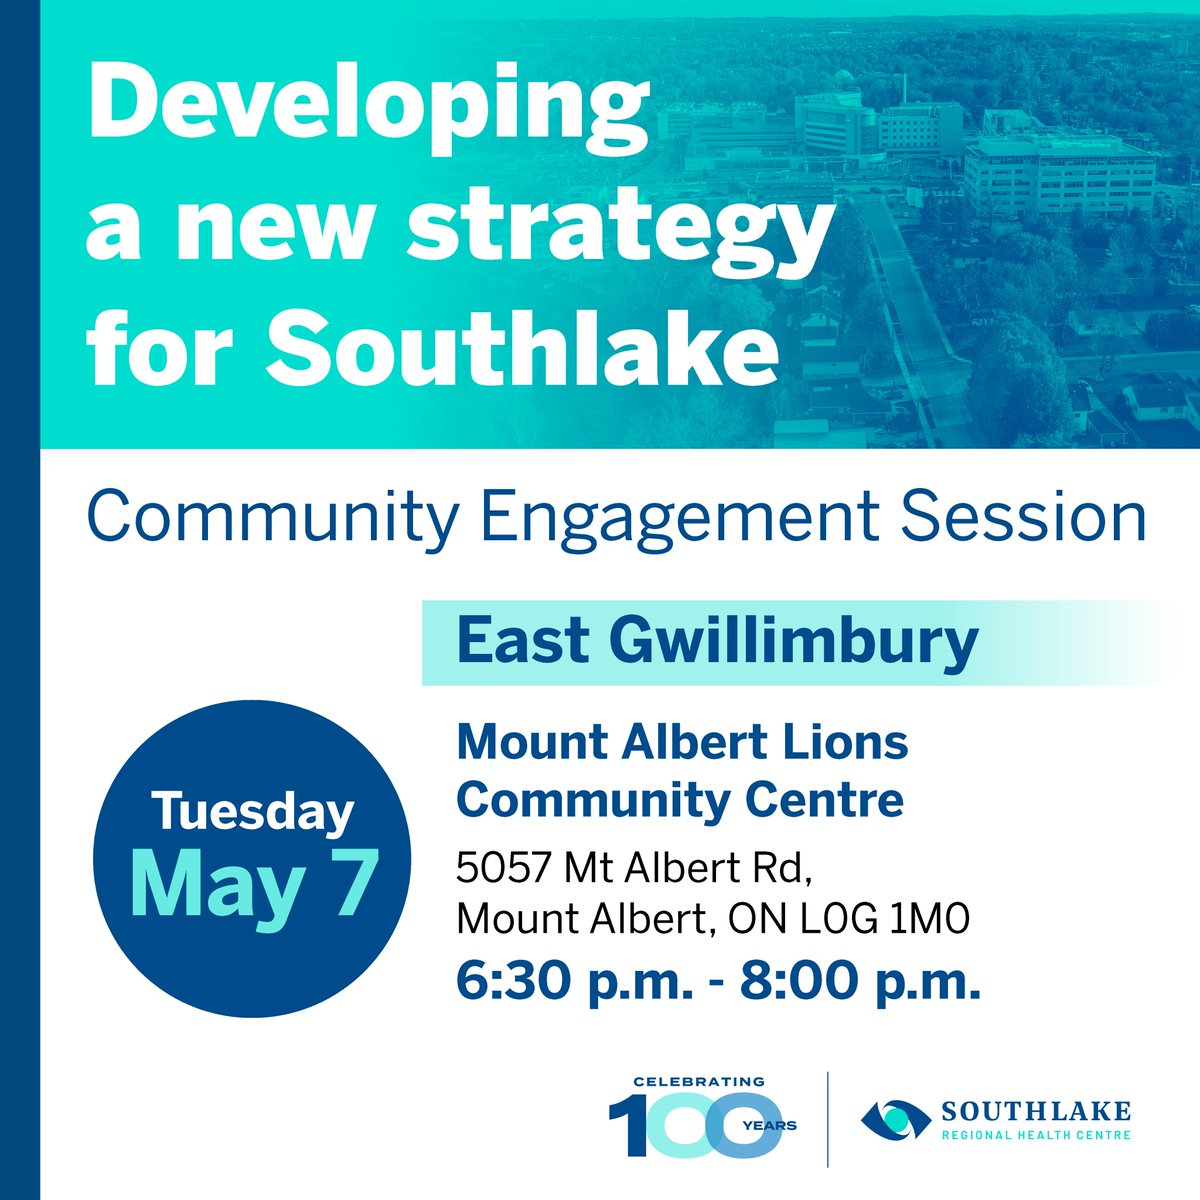 Calling all East Gwillimbury residents! 📢 Passionate about shaping the future of healthcare? Join us for an engaging town hall event! Southlake is celebrating its centennial anniversary and we want you to be a part of the journey forward. Learn more: southlake.ca/about-southlak…